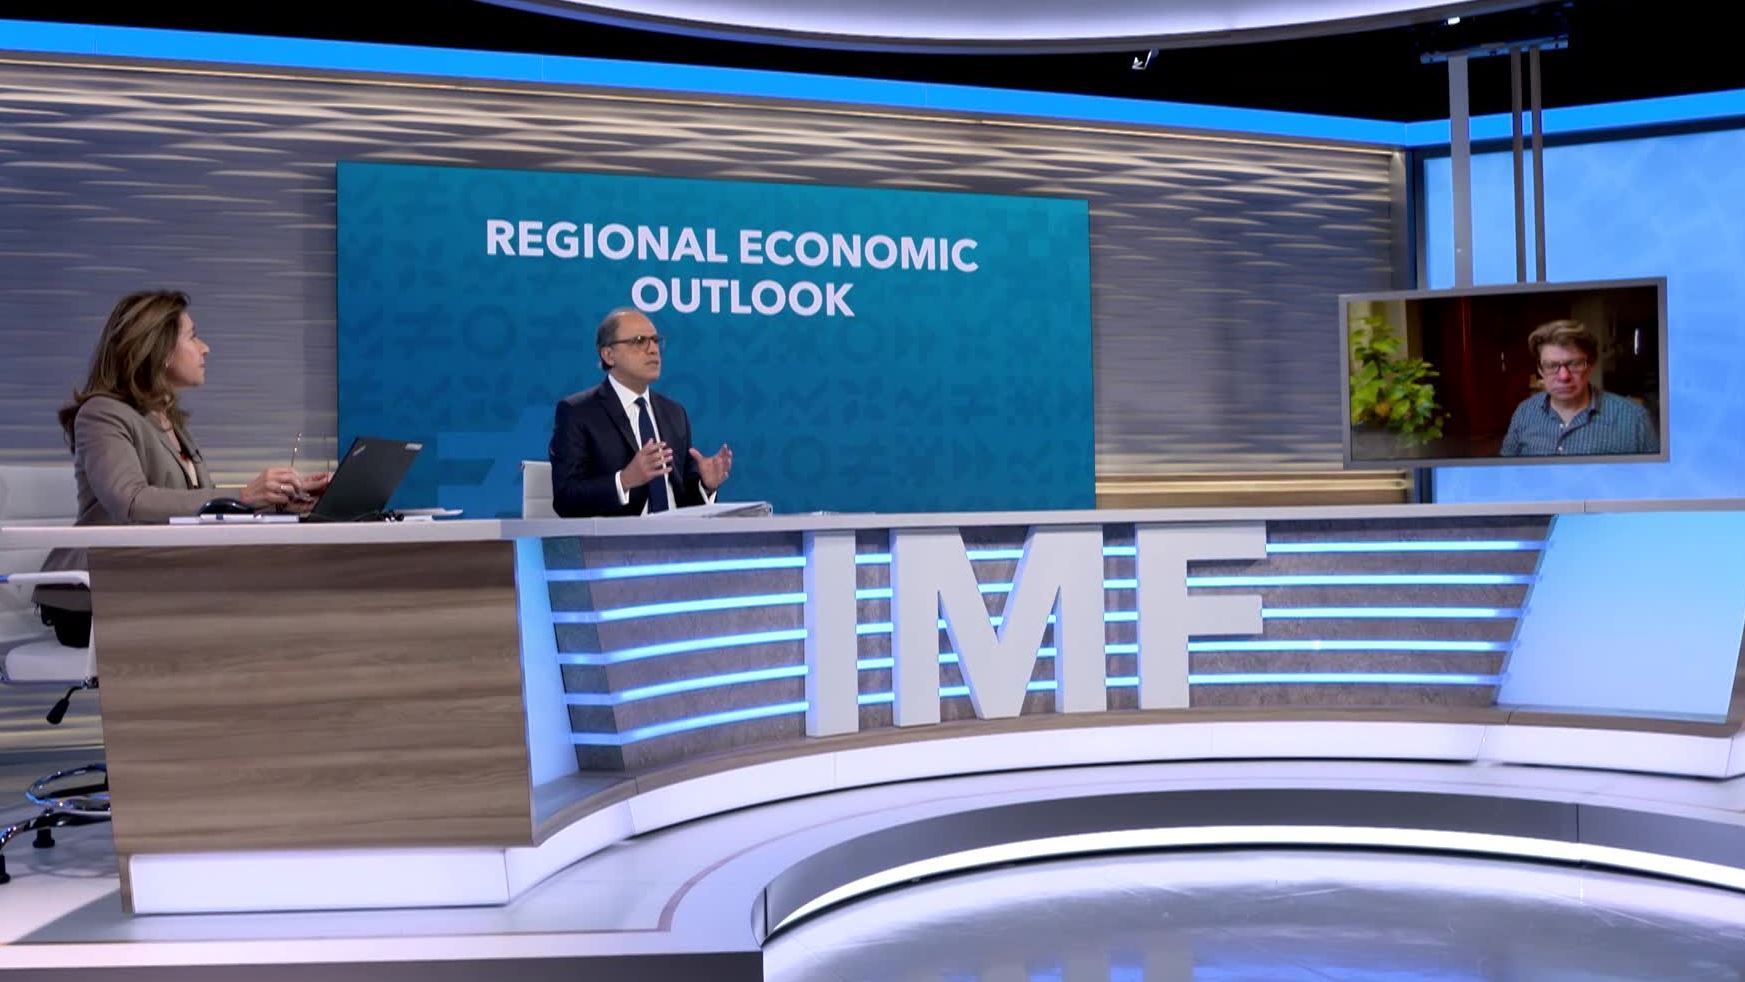 IMF / Middle East and Central Asia Department’s Regional Economic Outlook